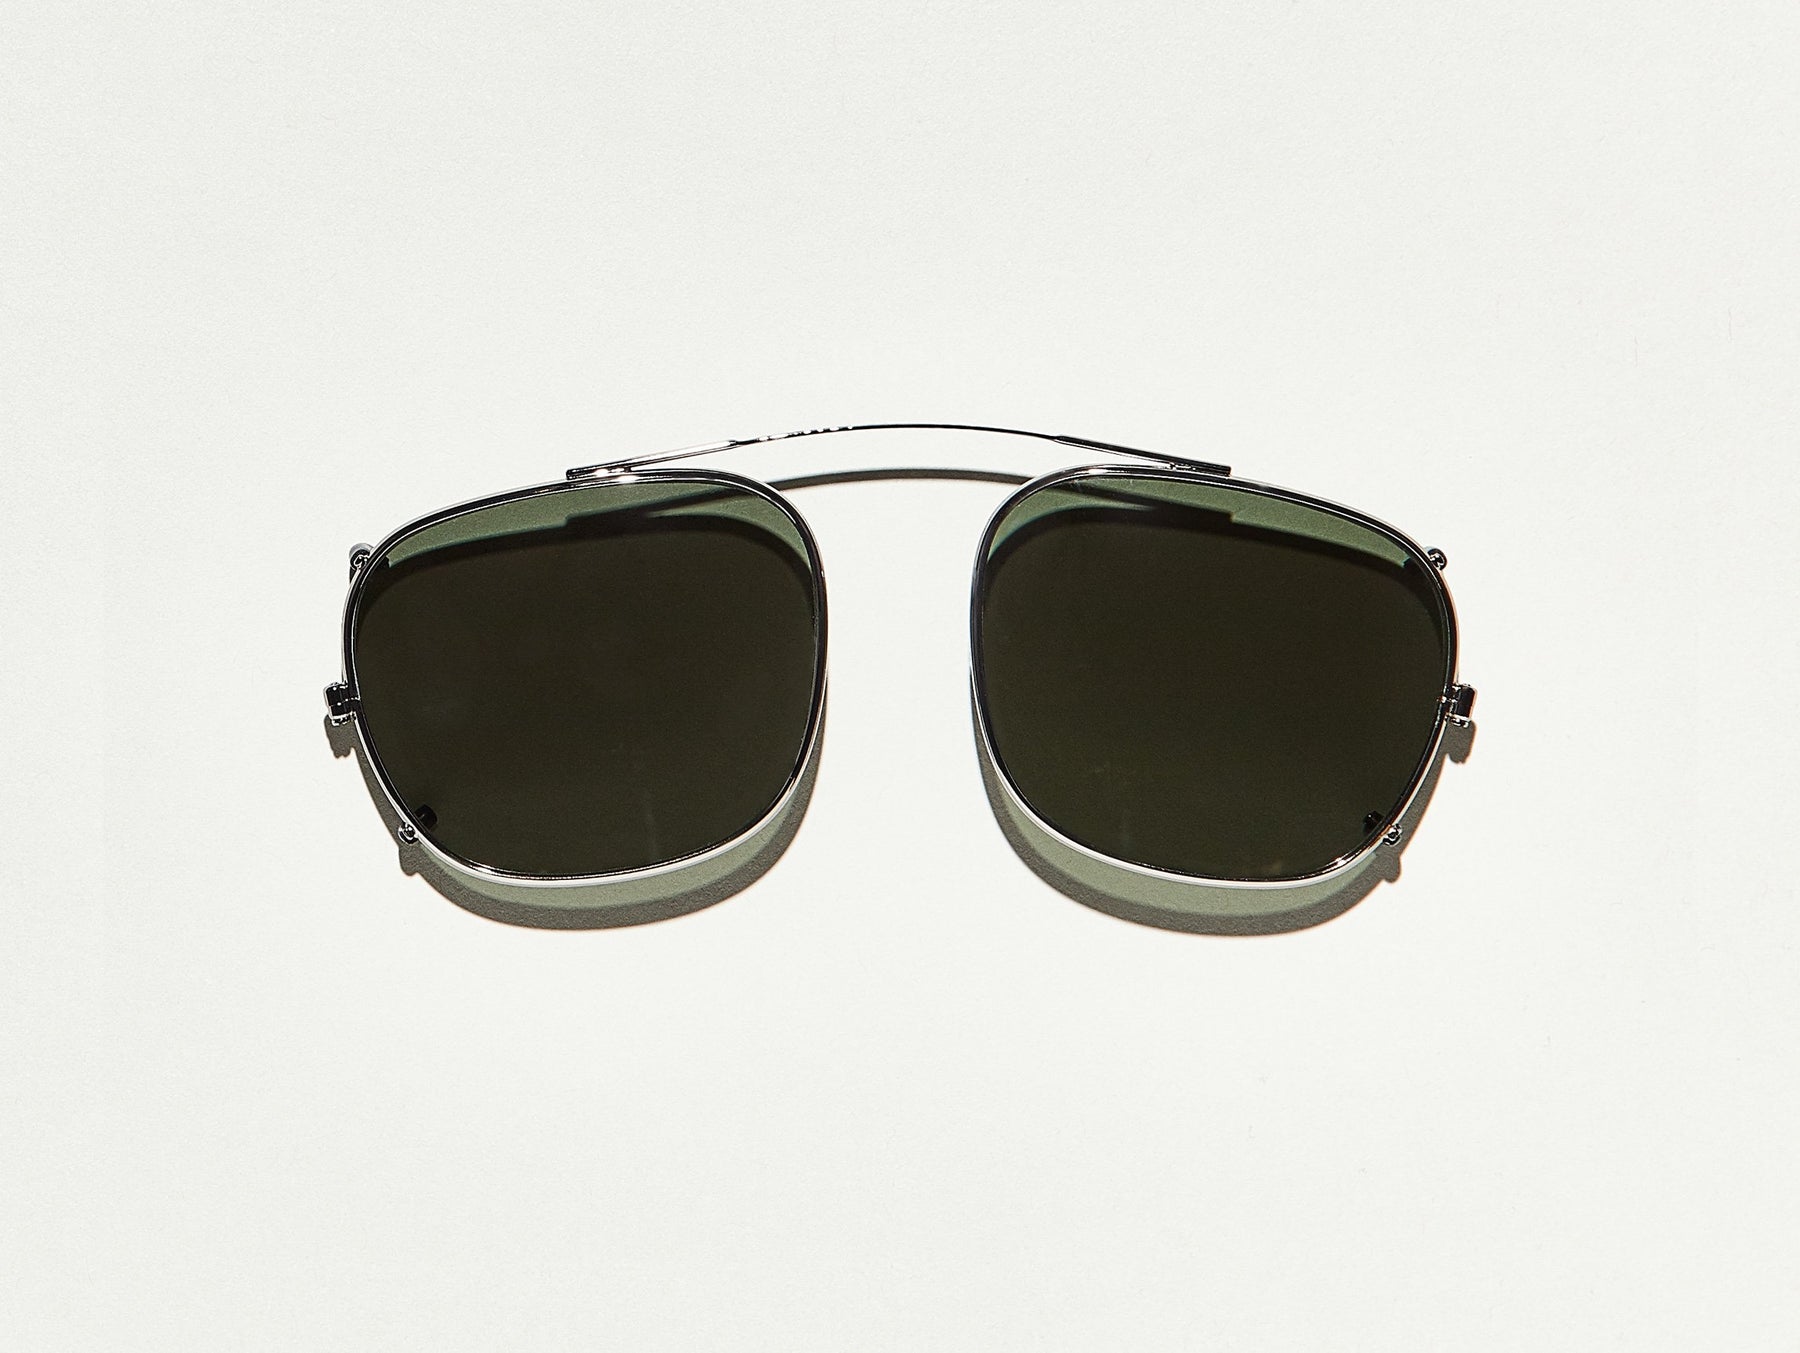 The SCHLEP CLIP in Gunmetal with G-15 Lenses